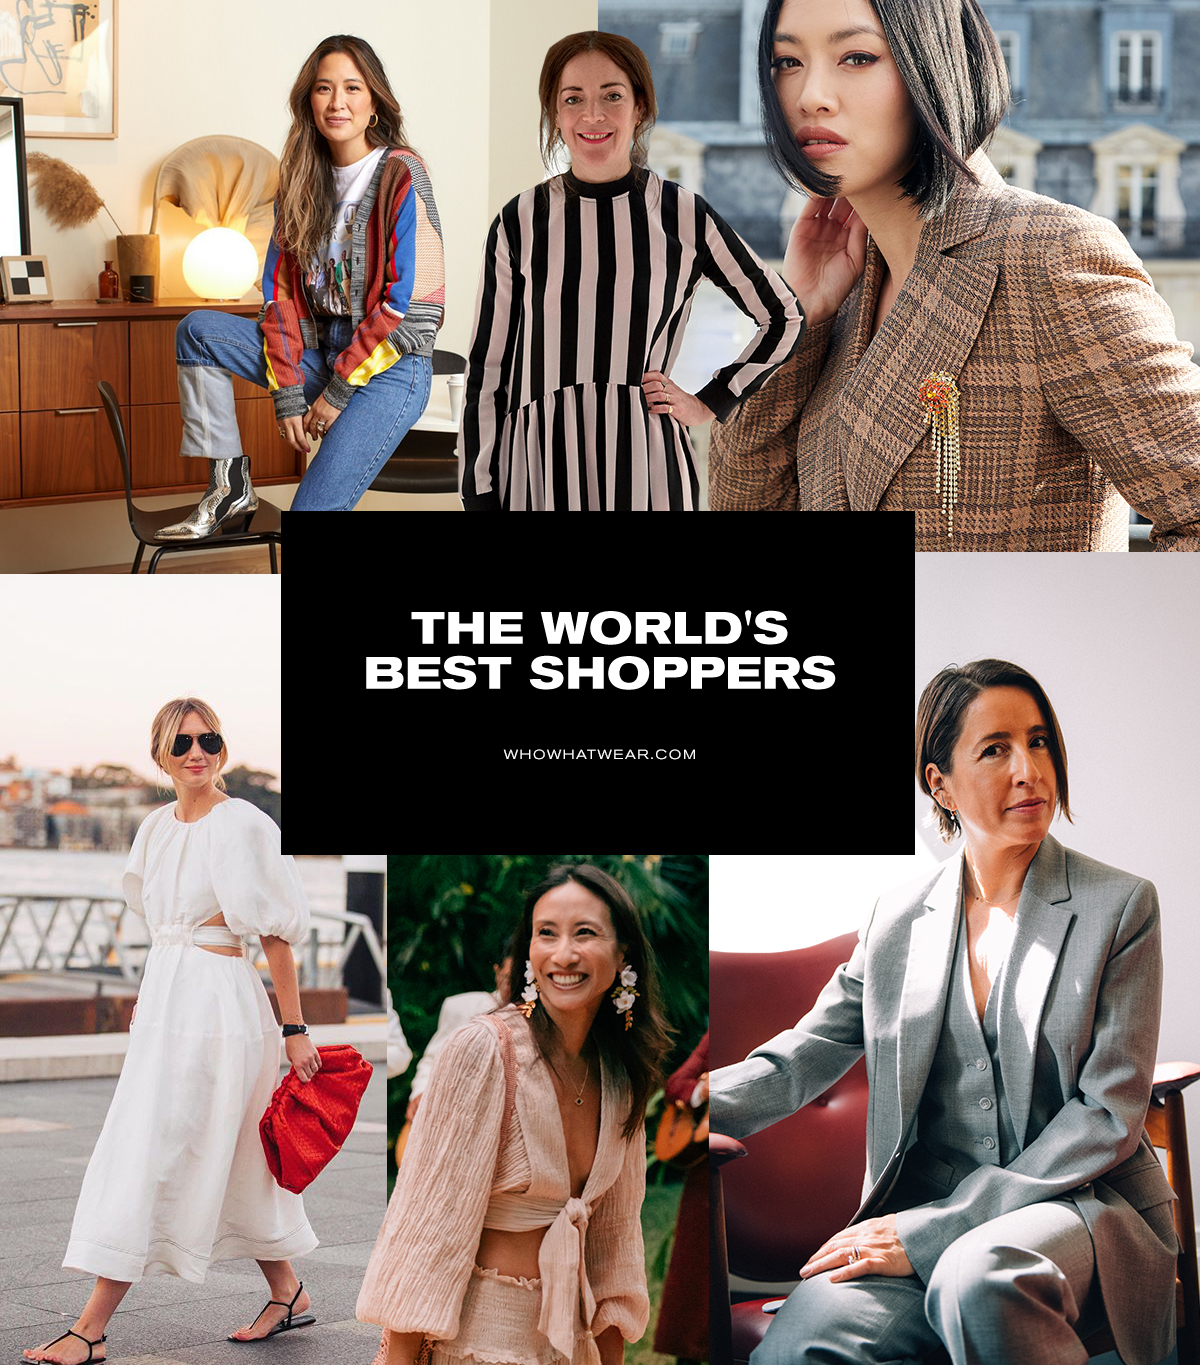 The World's Best Shoppers